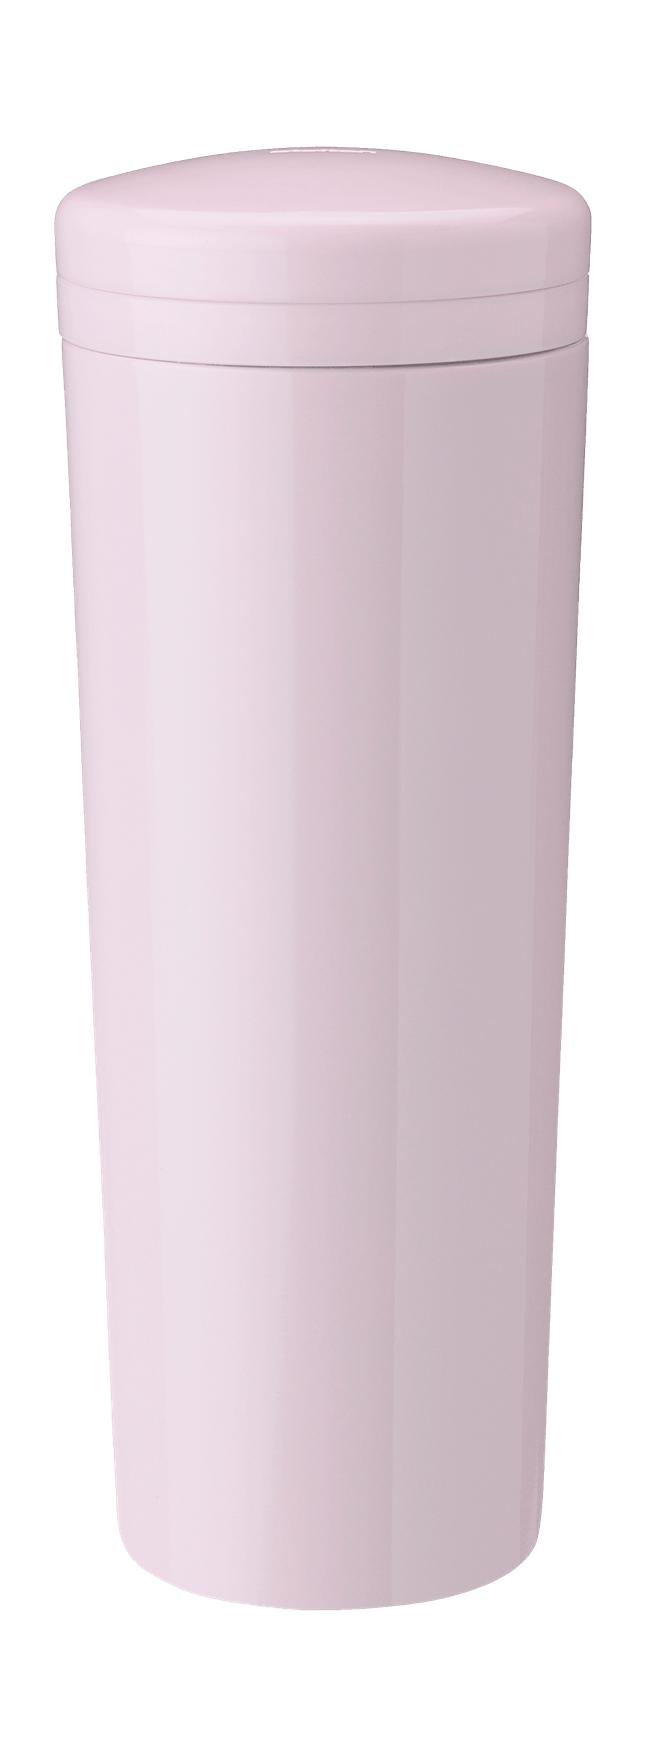 Stelton Carrie Thermos瓶0,5 L，玫瑰